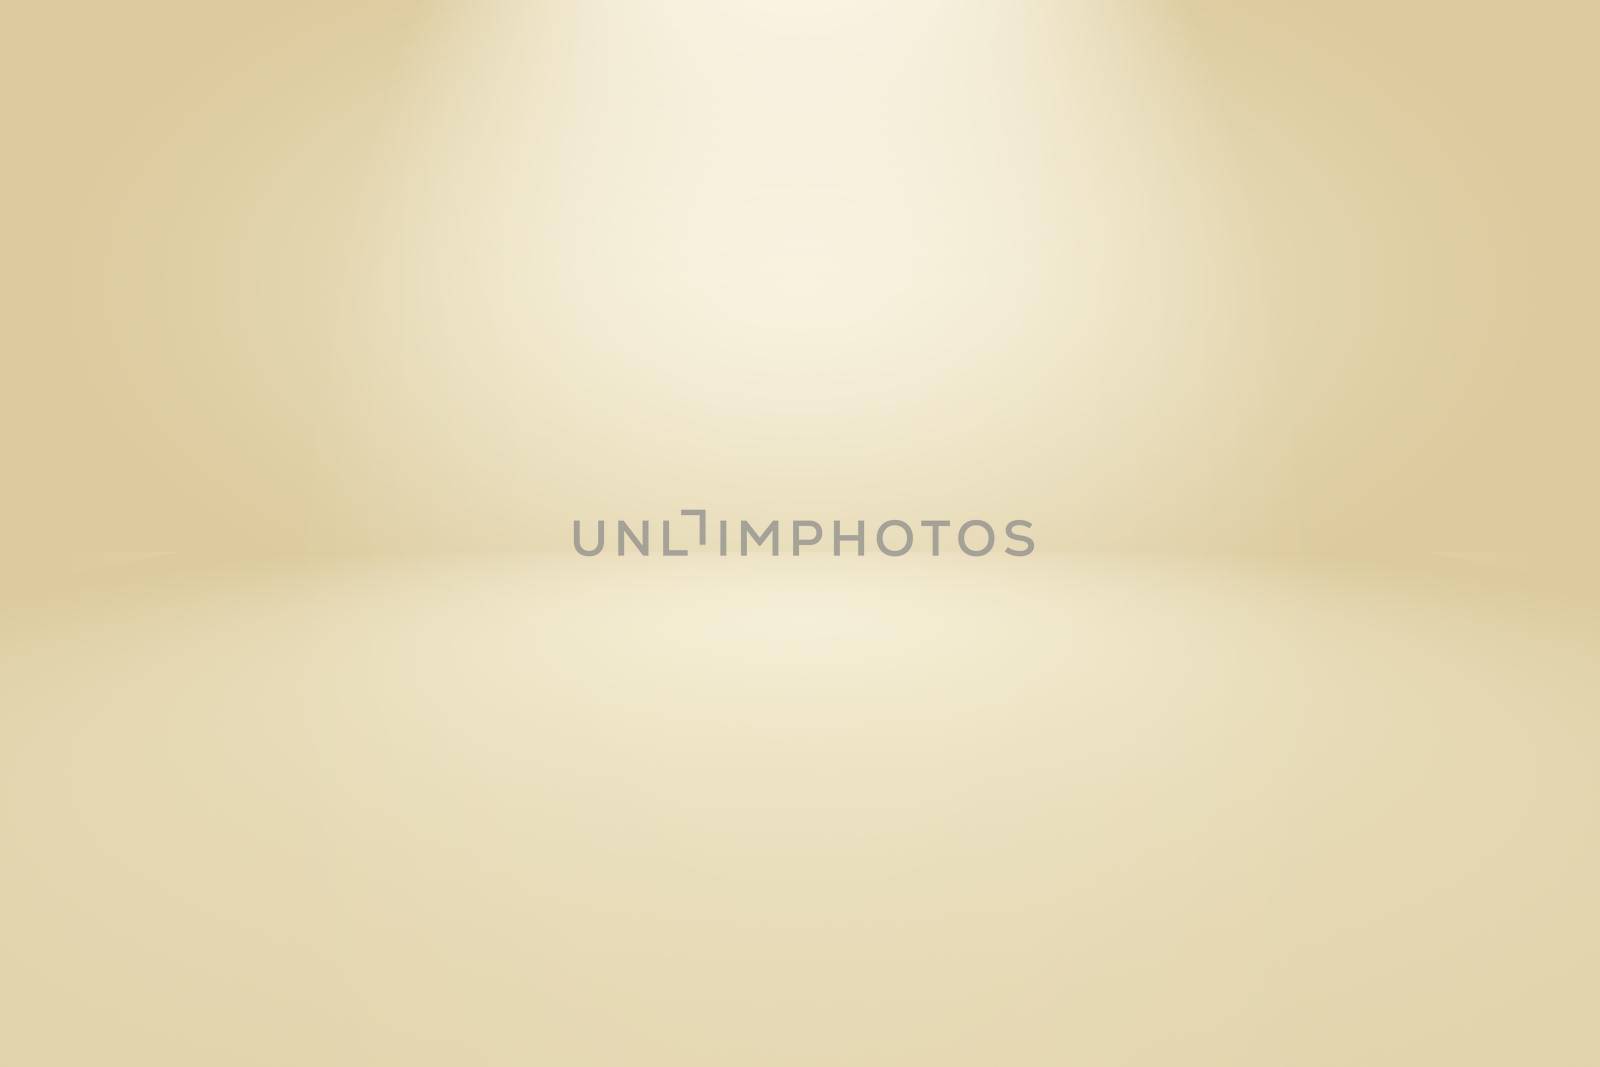 Magic abstract soft colors of shining yellow gradient studio background